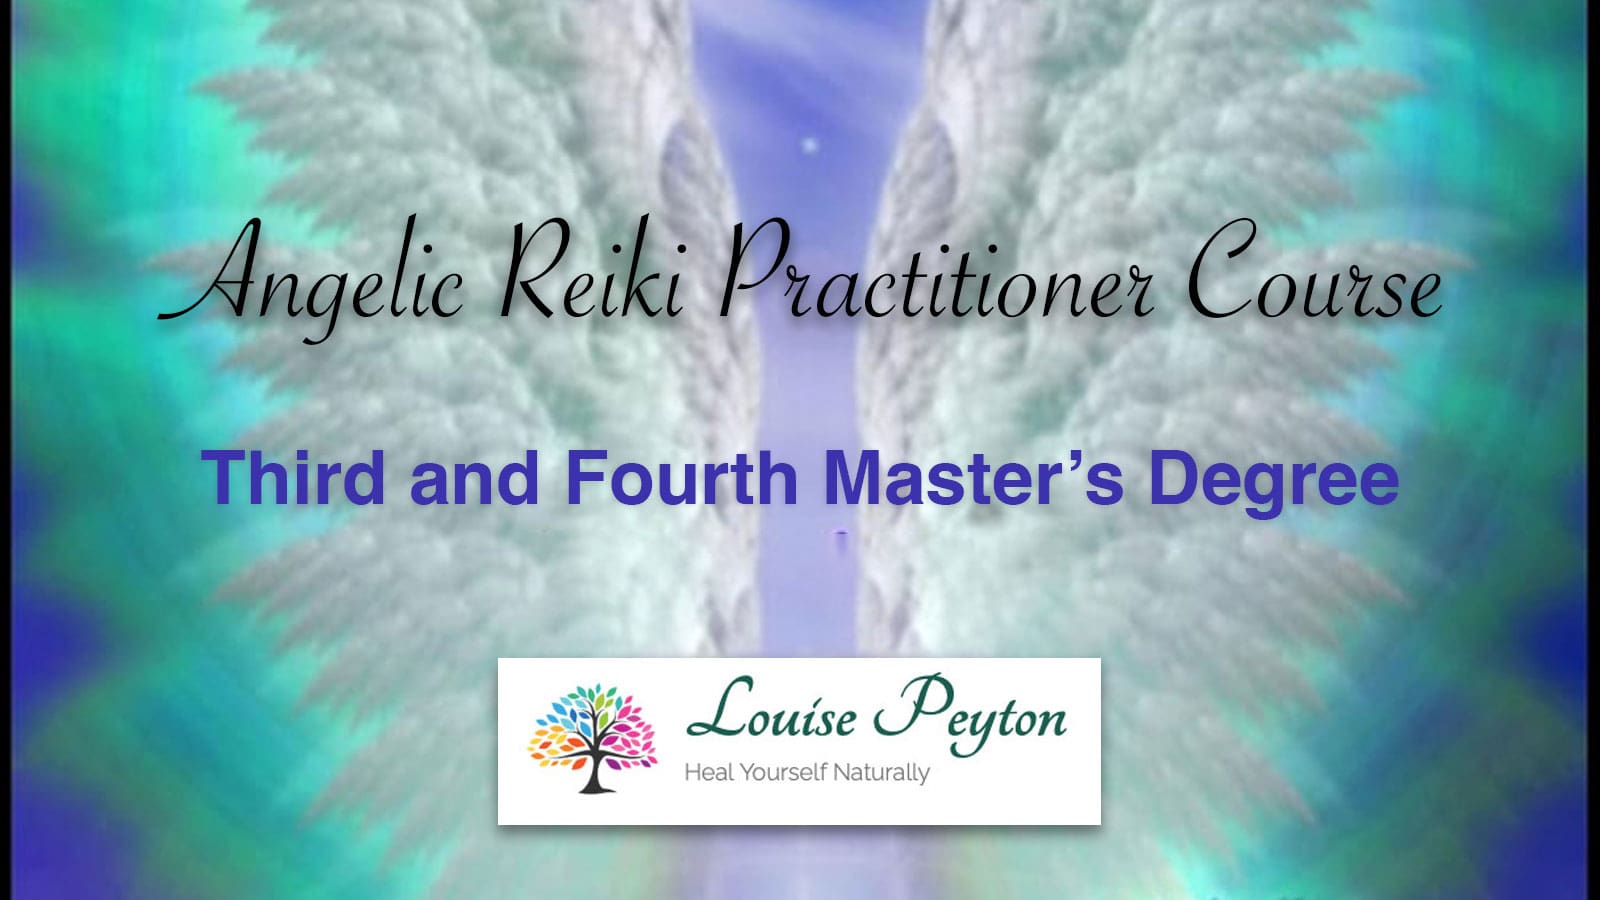 Thetford Bubbly Hub What’s On and Events Angelic Reiki Practitioner Course third and fourth Master's Degree